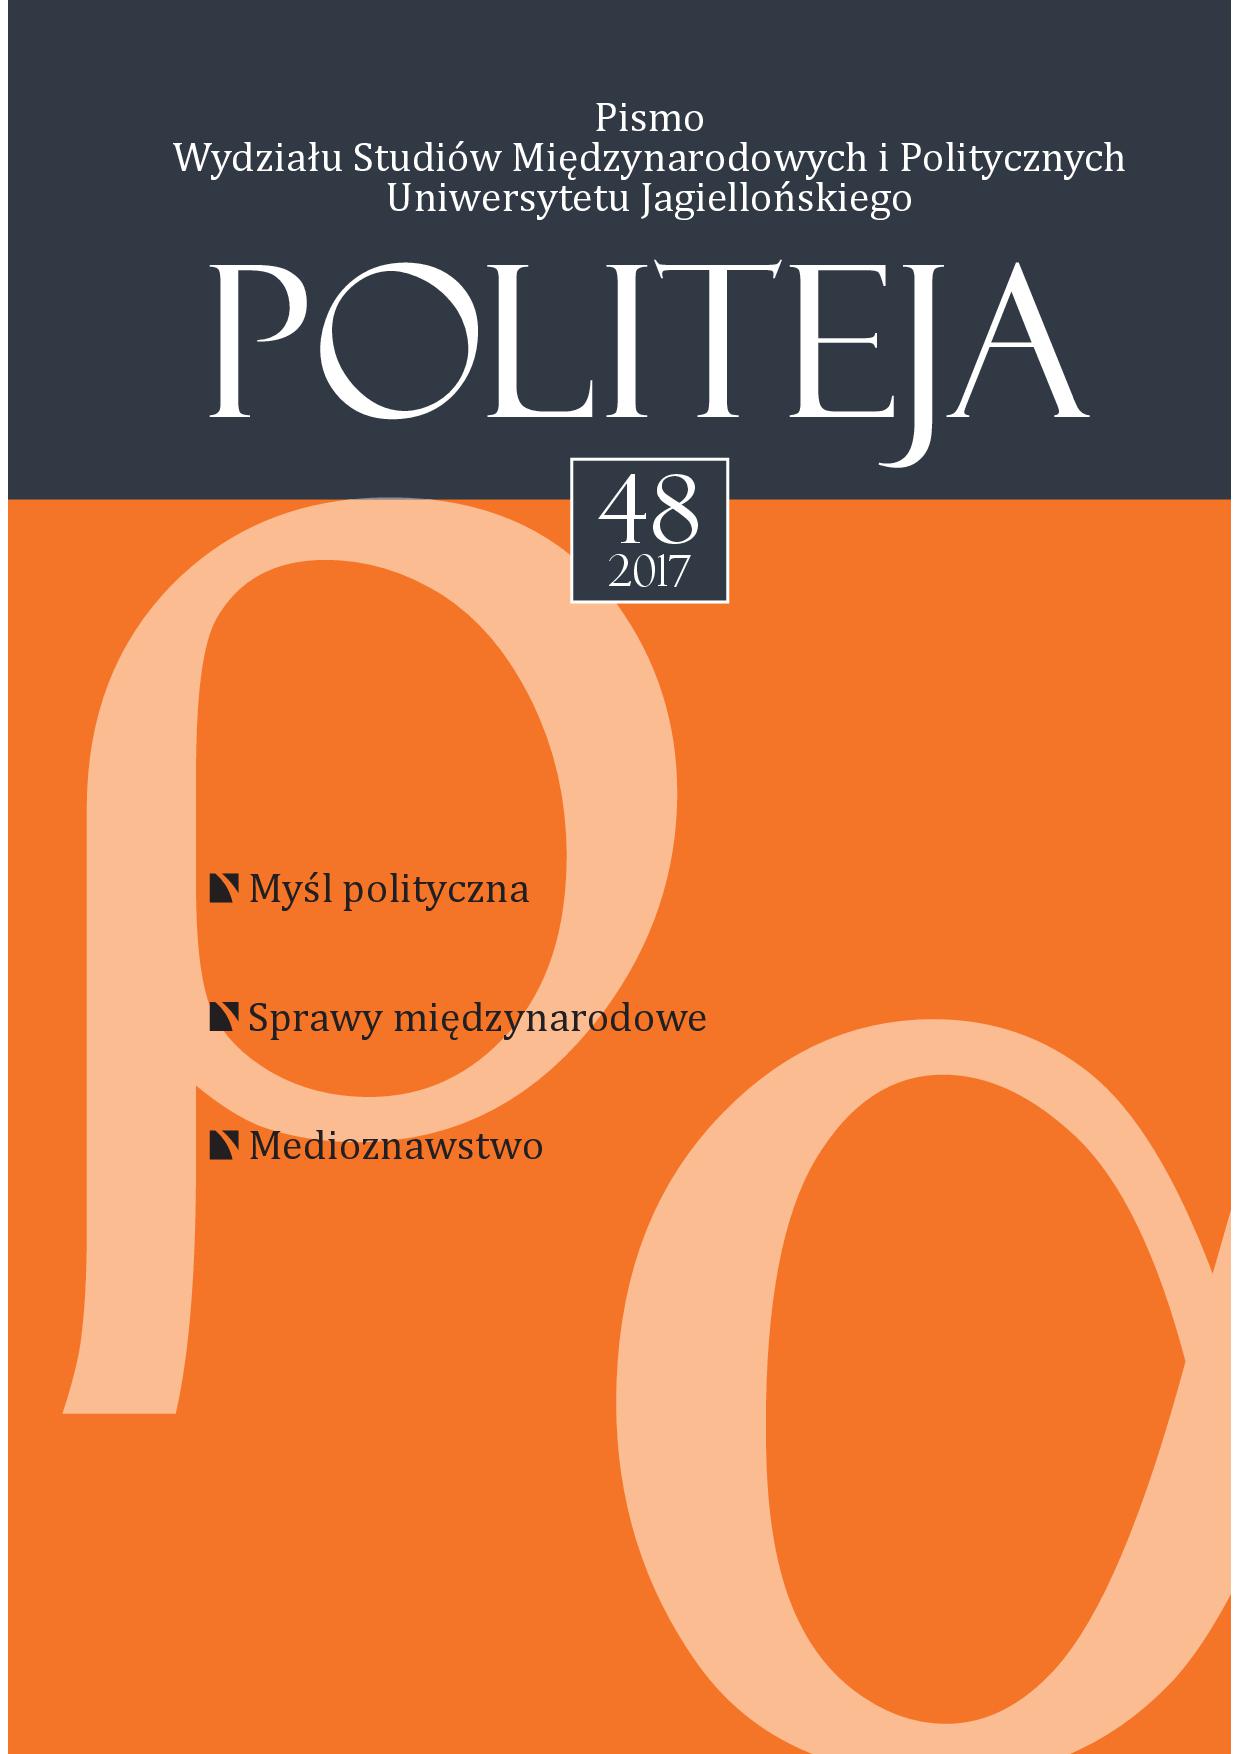 Internet Electoral Advertising and Advertising in the “Old” Media in Polish Parliamentary Campaigns from 2001 to 2015 Cover Image